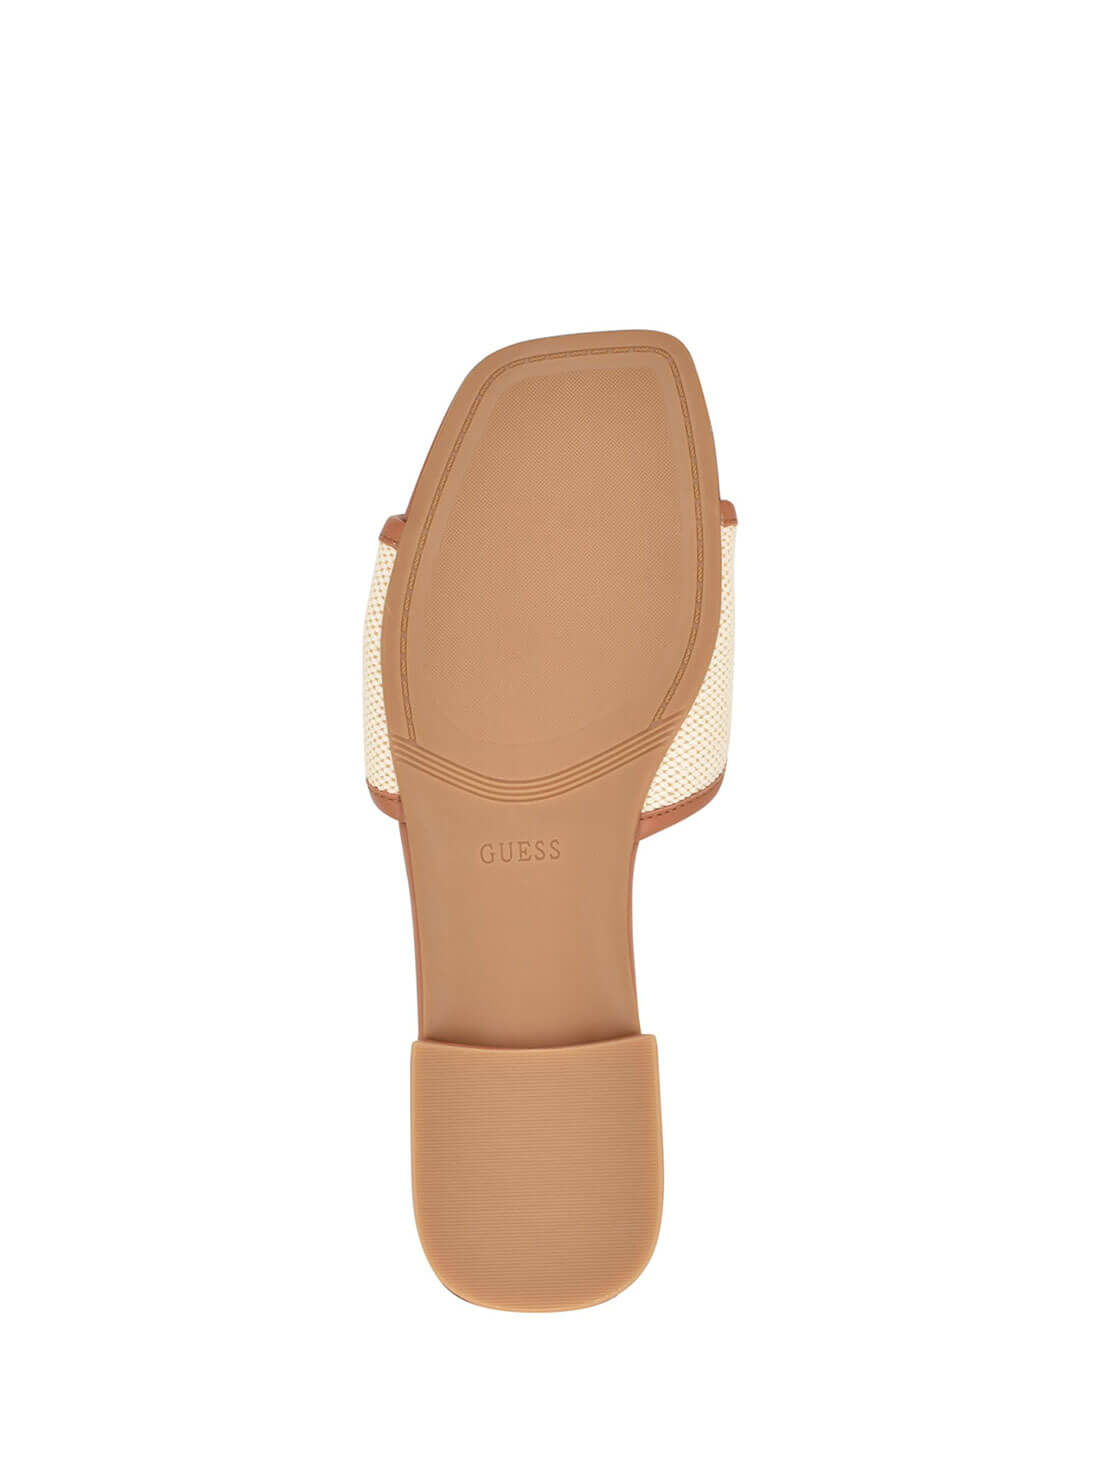 Tan Tampa Slide Sandals | GUESS Women's Shoes | bottom view